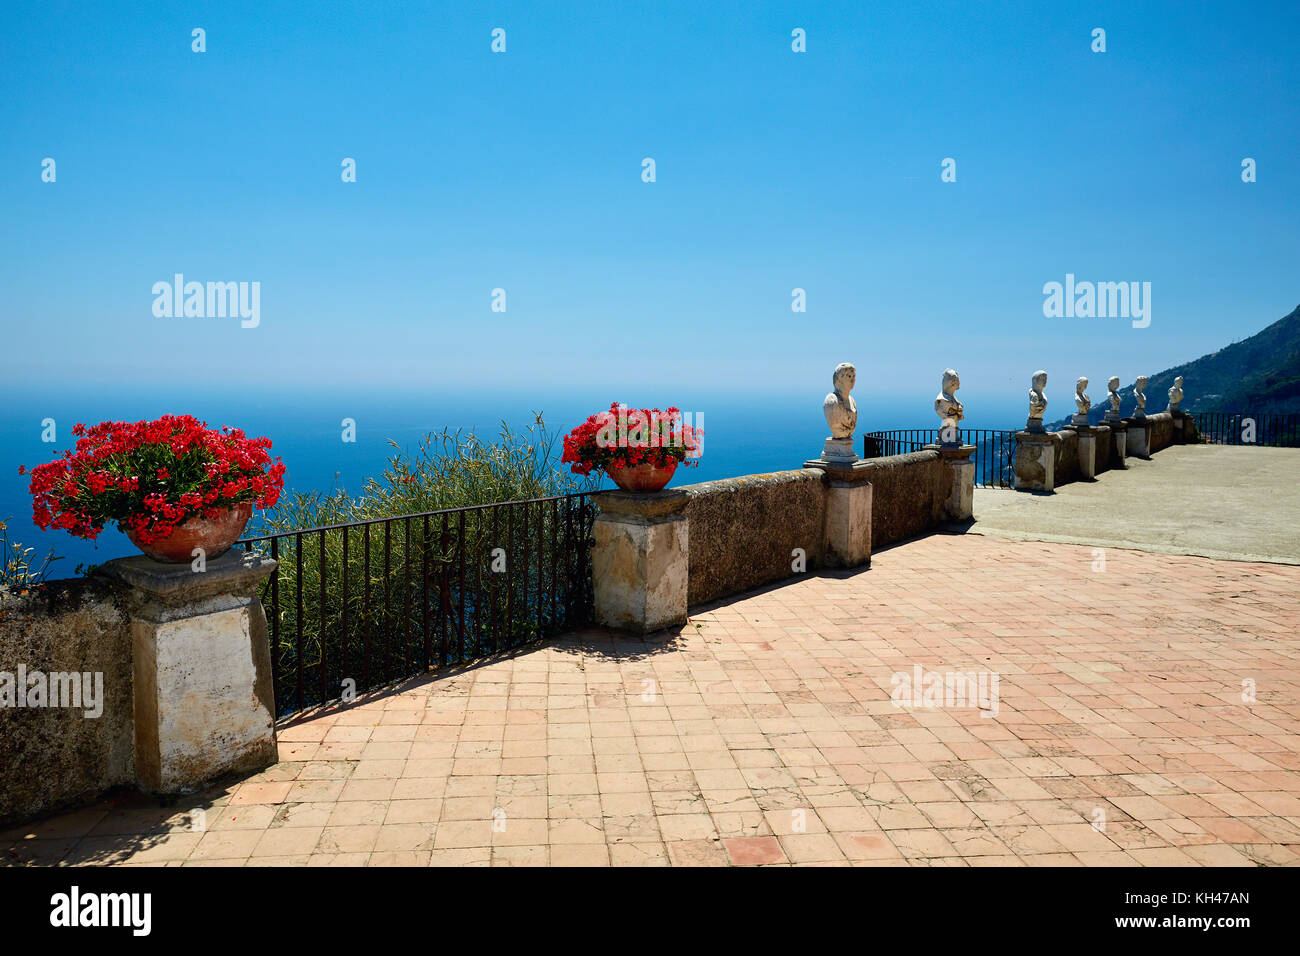 Terrace of Infinity with Potted Flowers and Statues, Villa Cimbrone, Ravello, Campania, Italy. Stock Photo